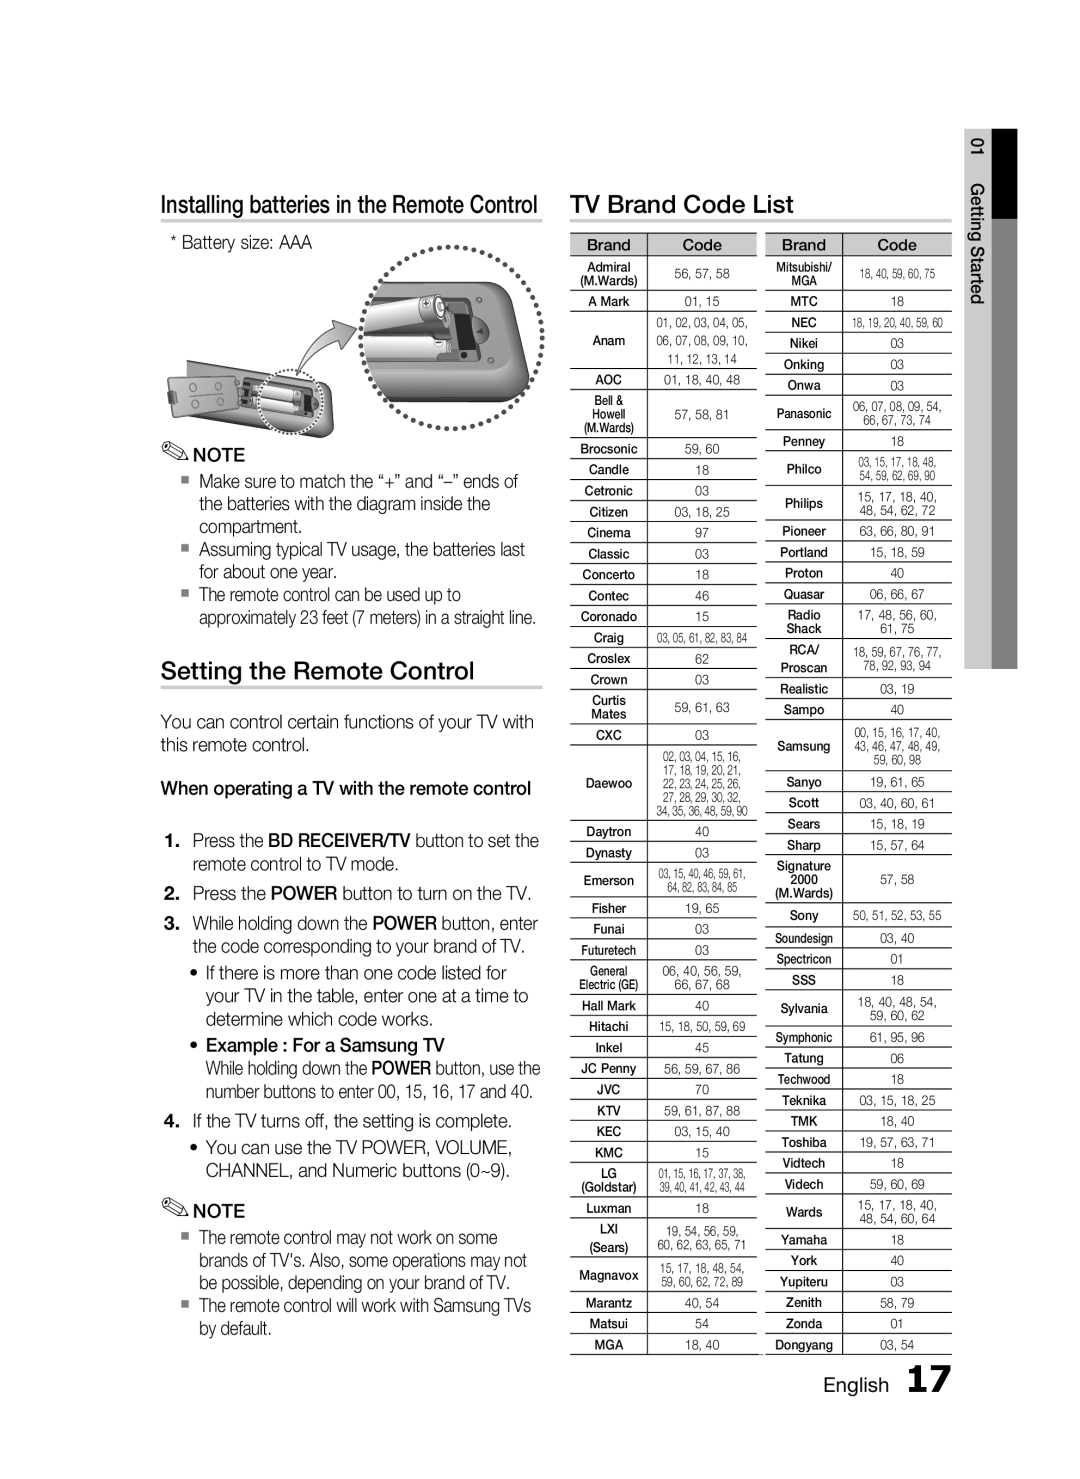 Samsung AH68-02258S TV Brand Code List, Setting the Remote Control, Installing batteries in the Remote Control, English 